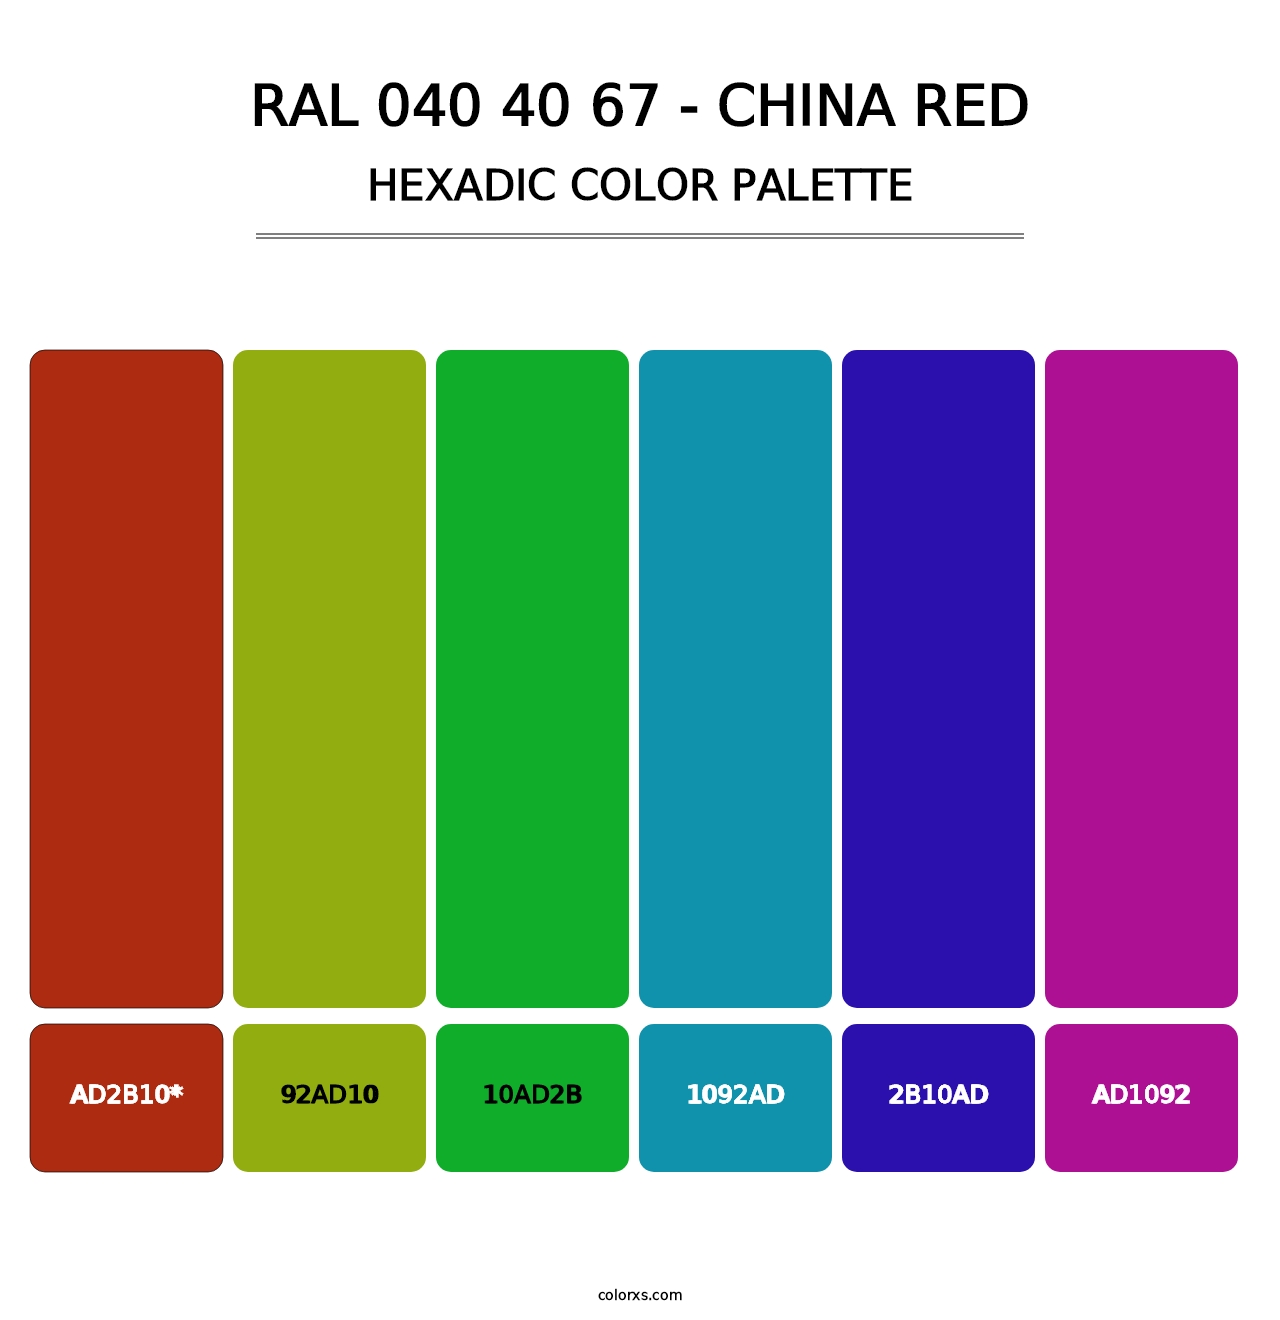 RAL 040 40 67 - China Red - Hexadic Color Palette